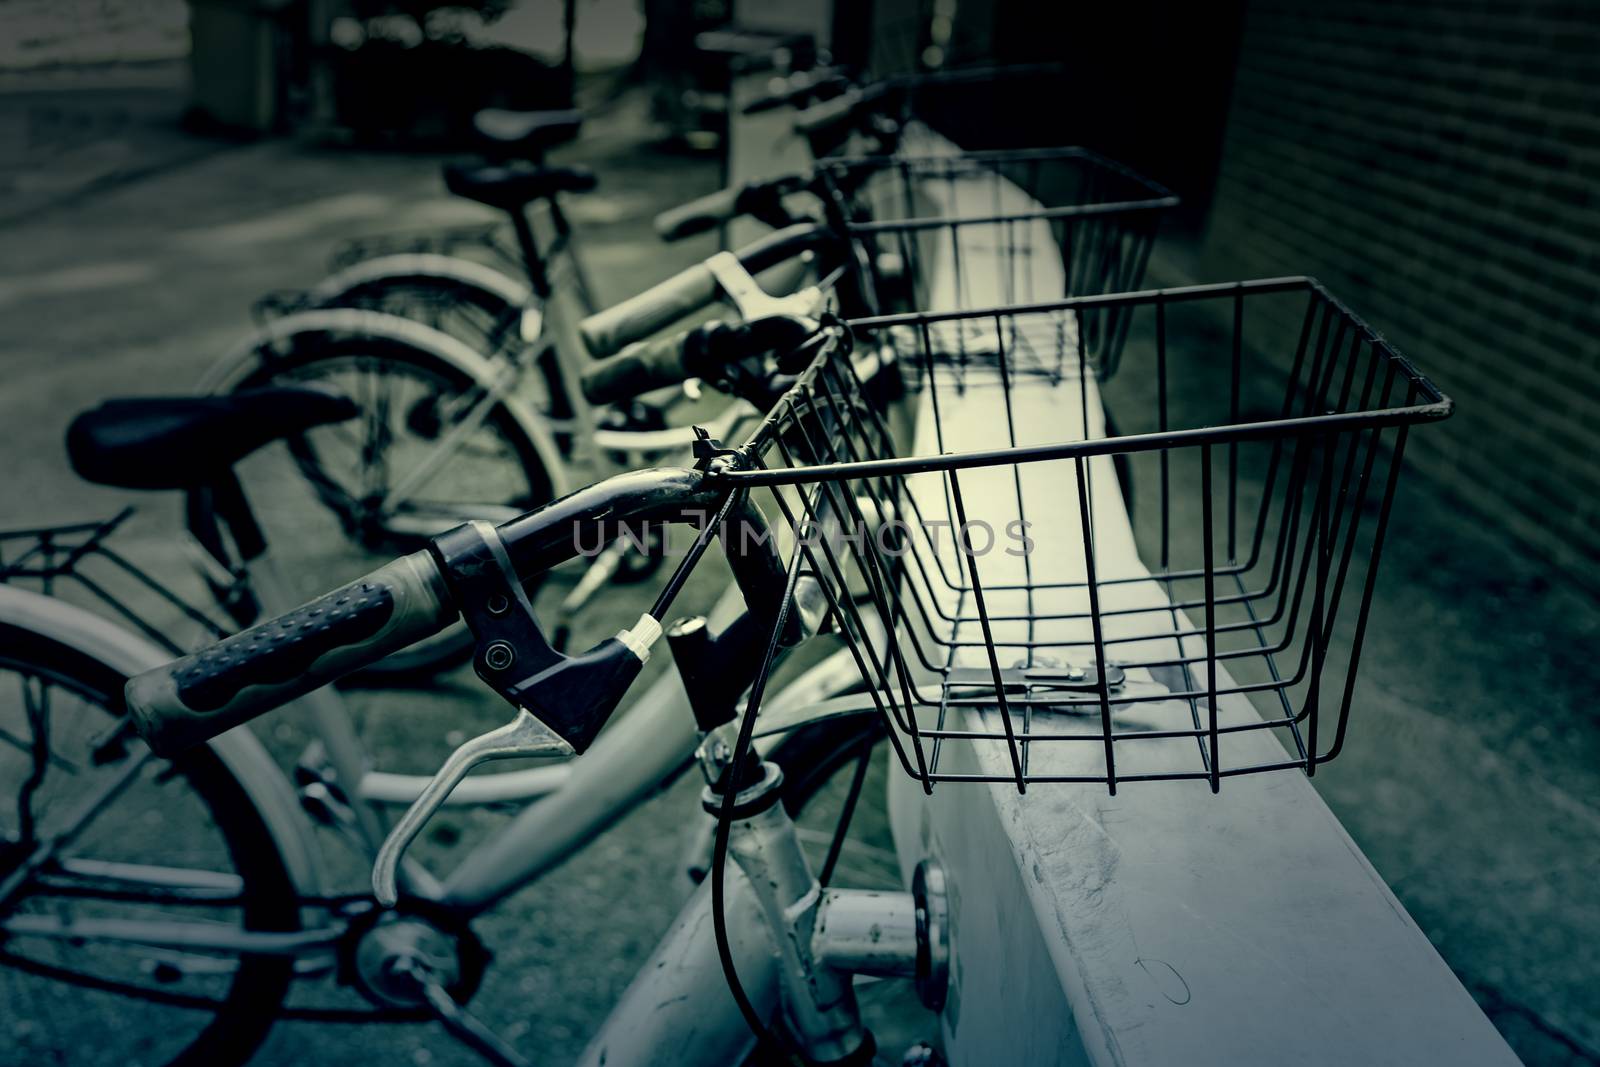 Bicycles stops in town by esebene